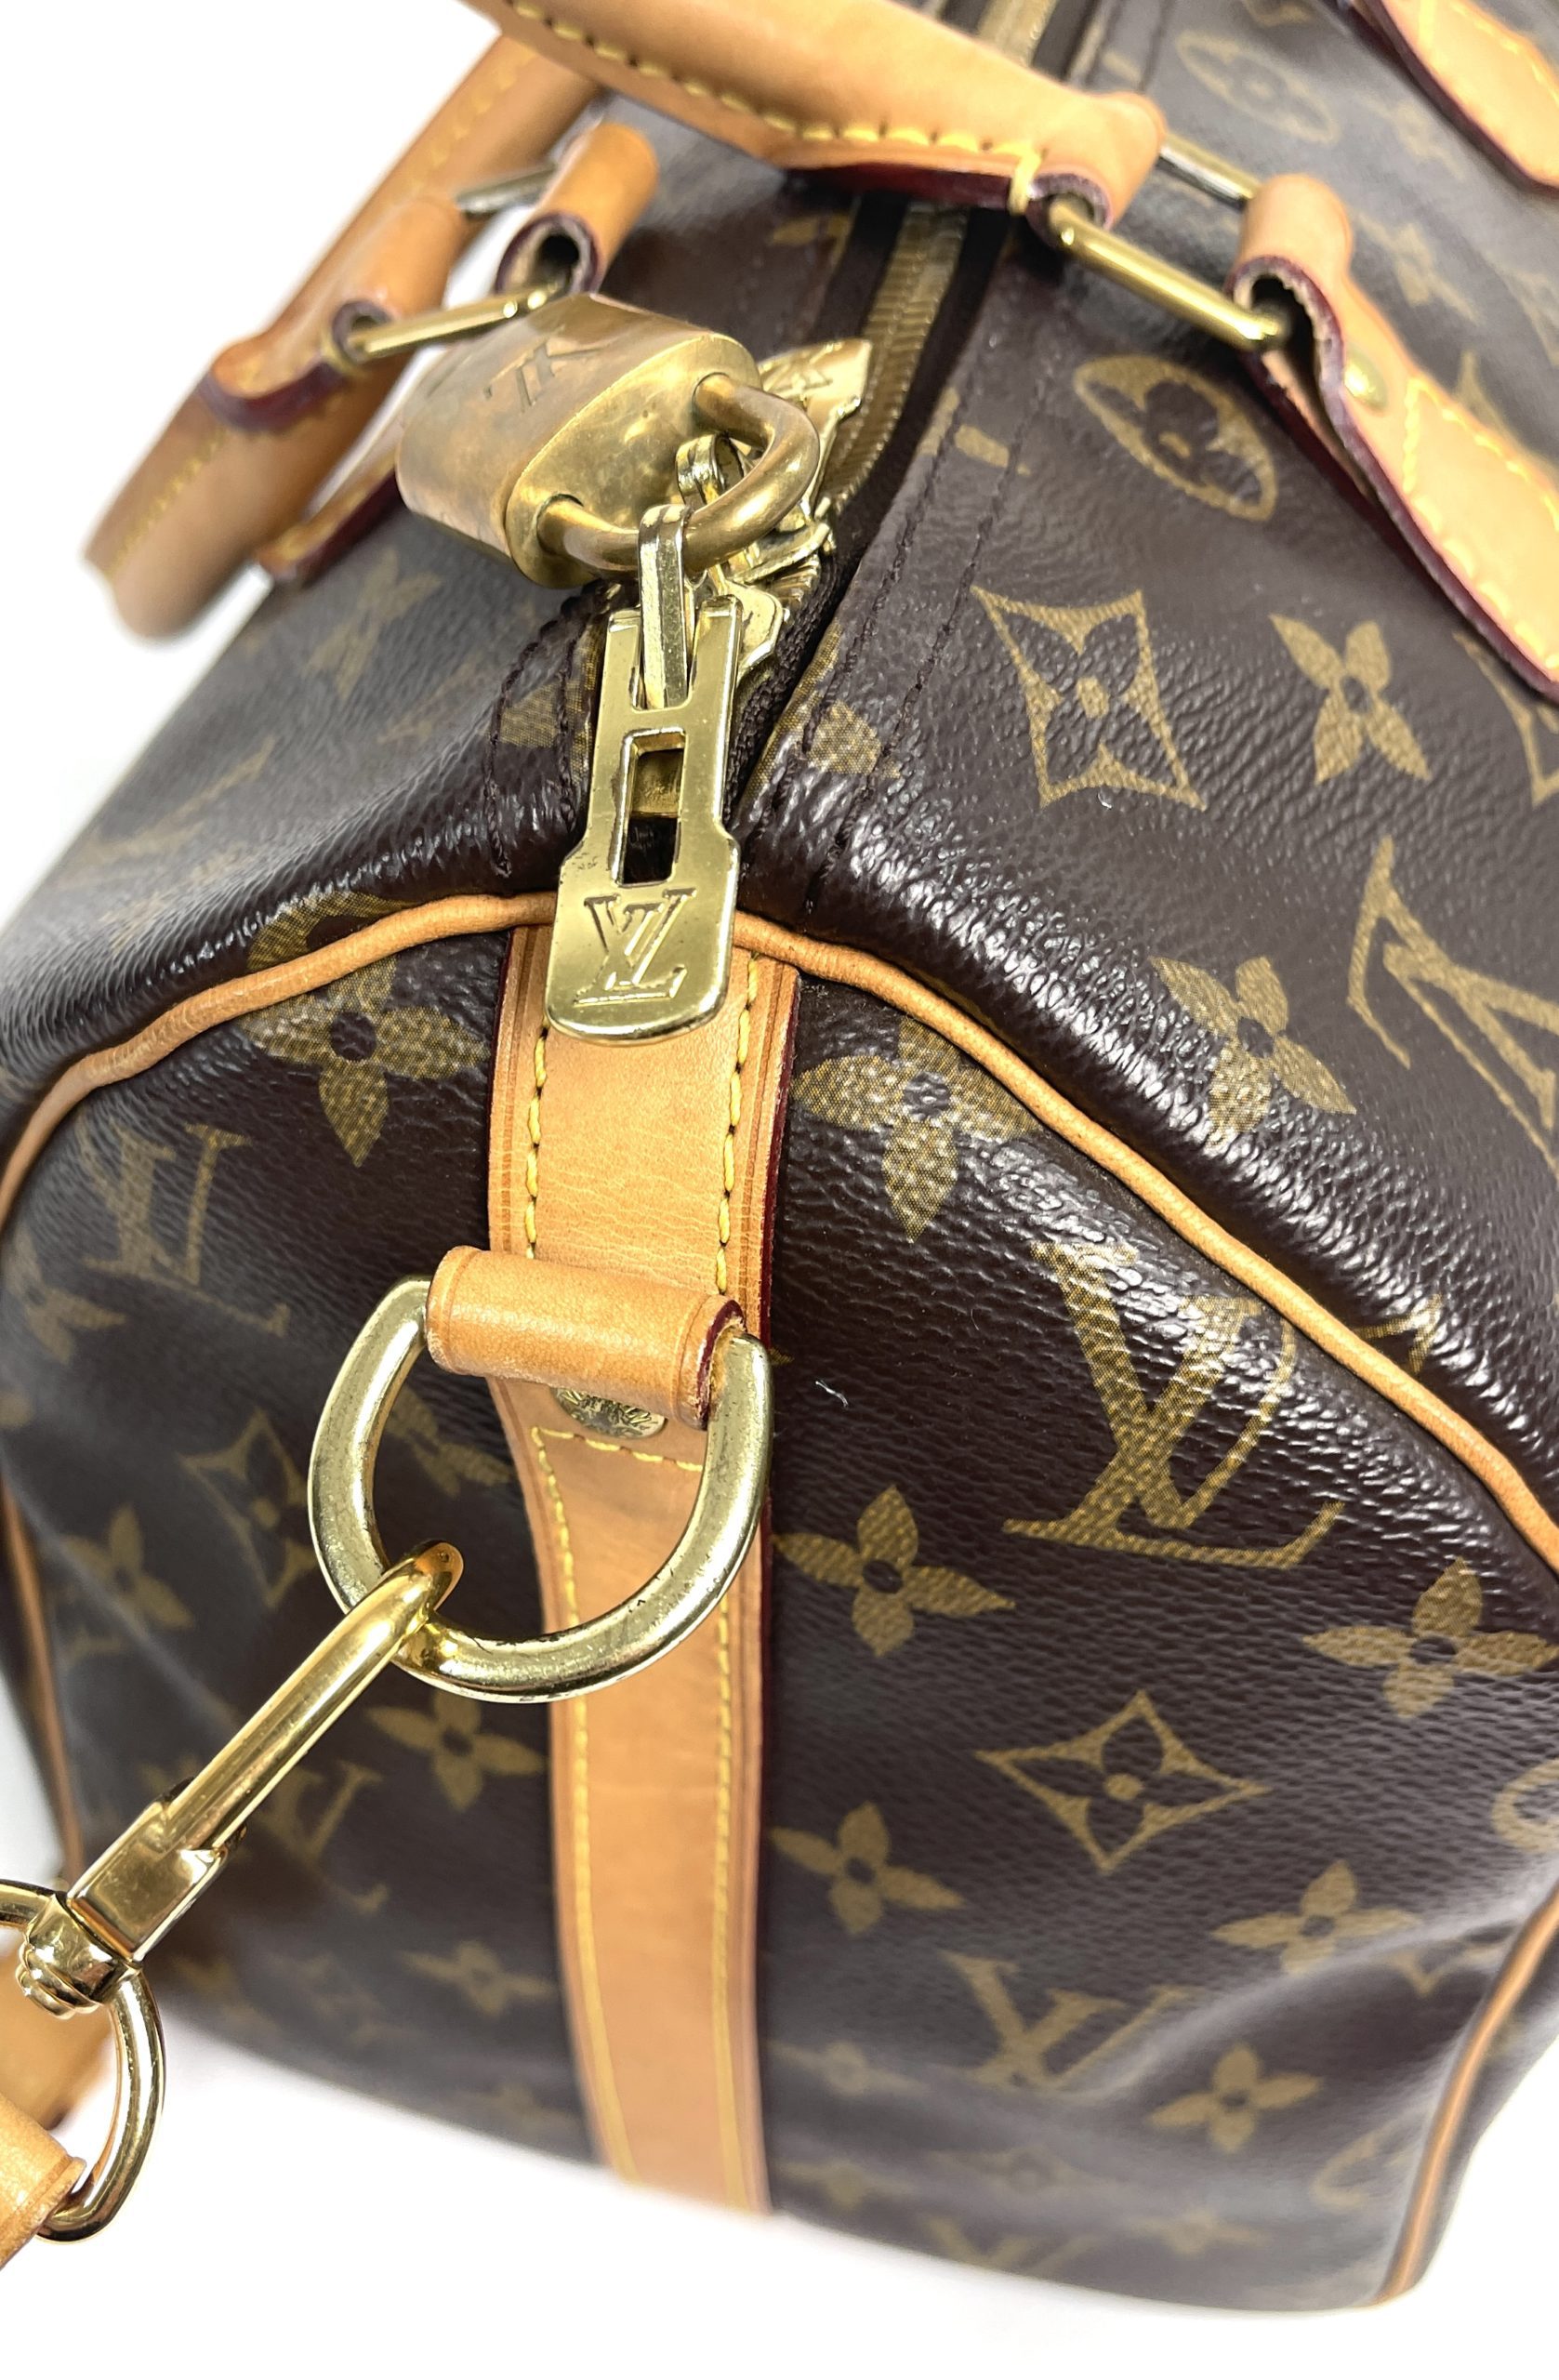 19. Requested Louis Vuitton Epi Speedy 30 Review 